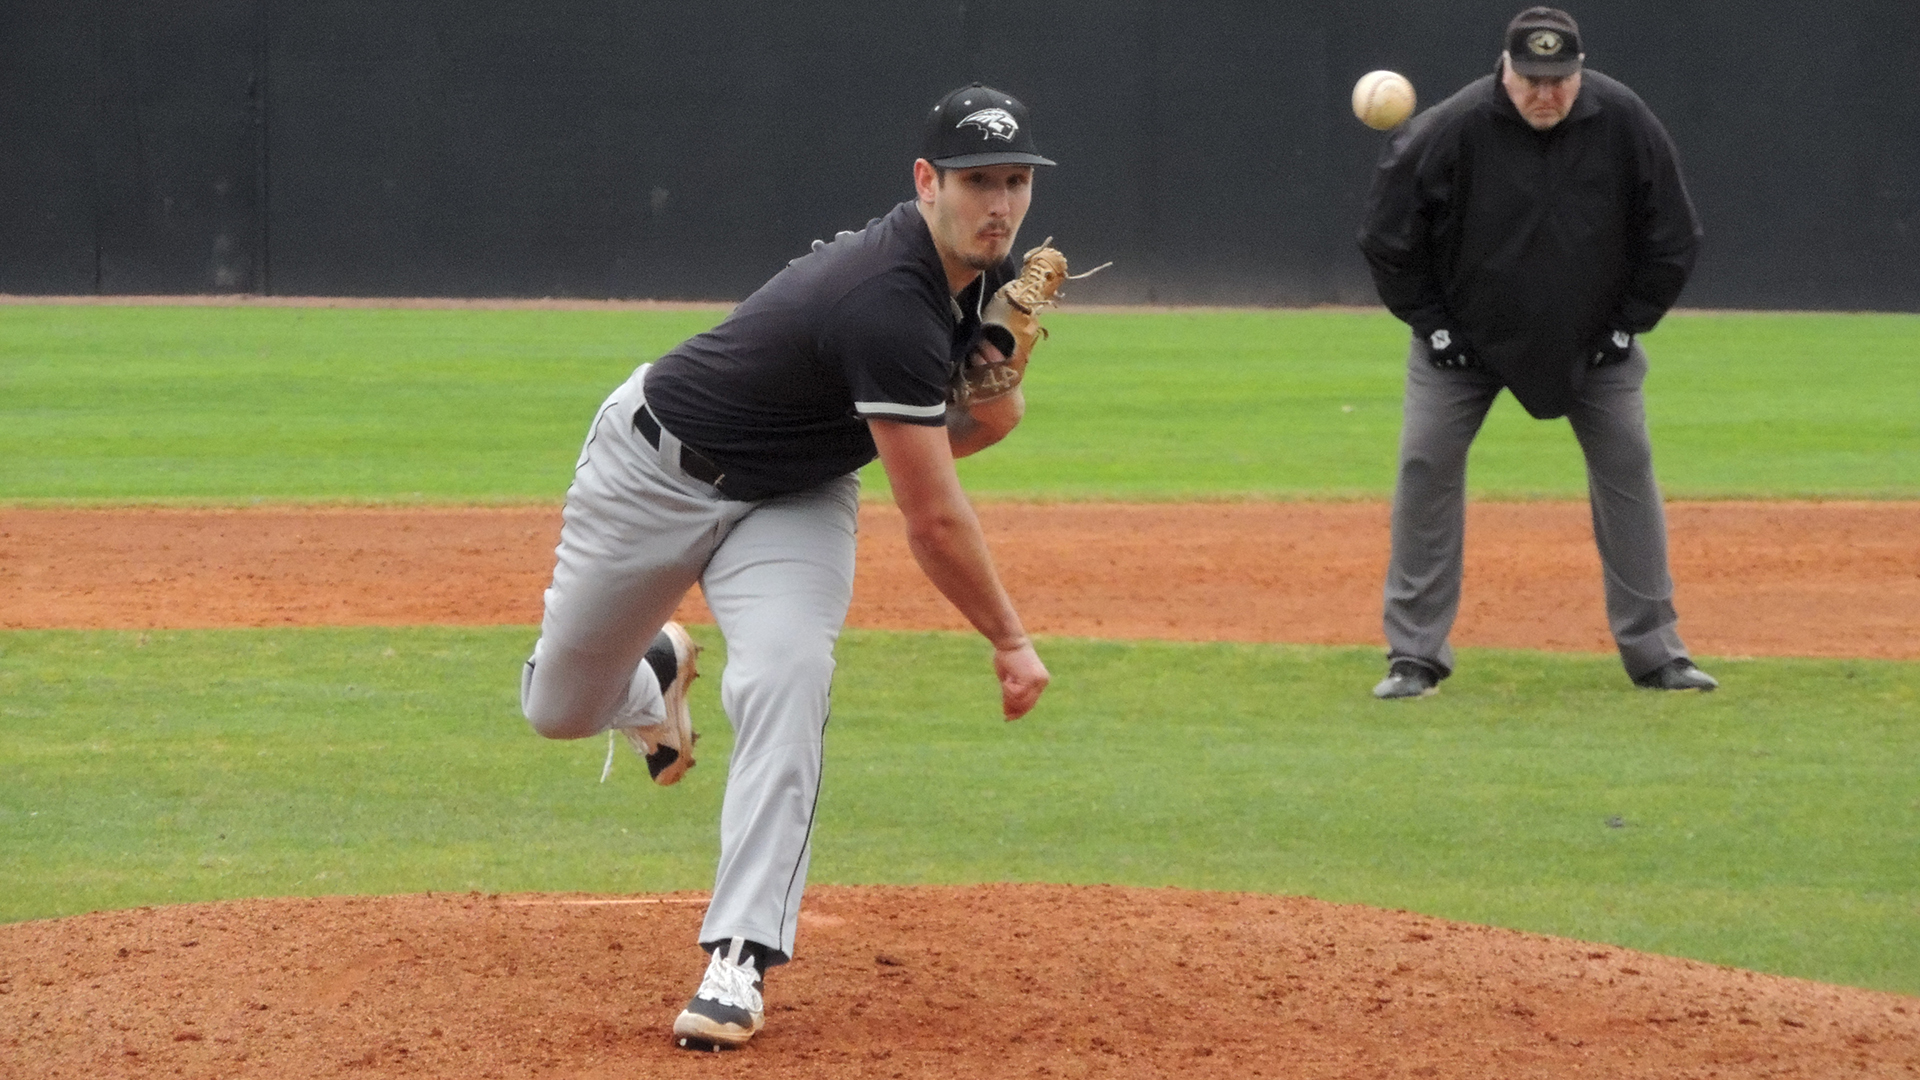 Harry Orth struck out nine Bulldogs in four innings of relief.